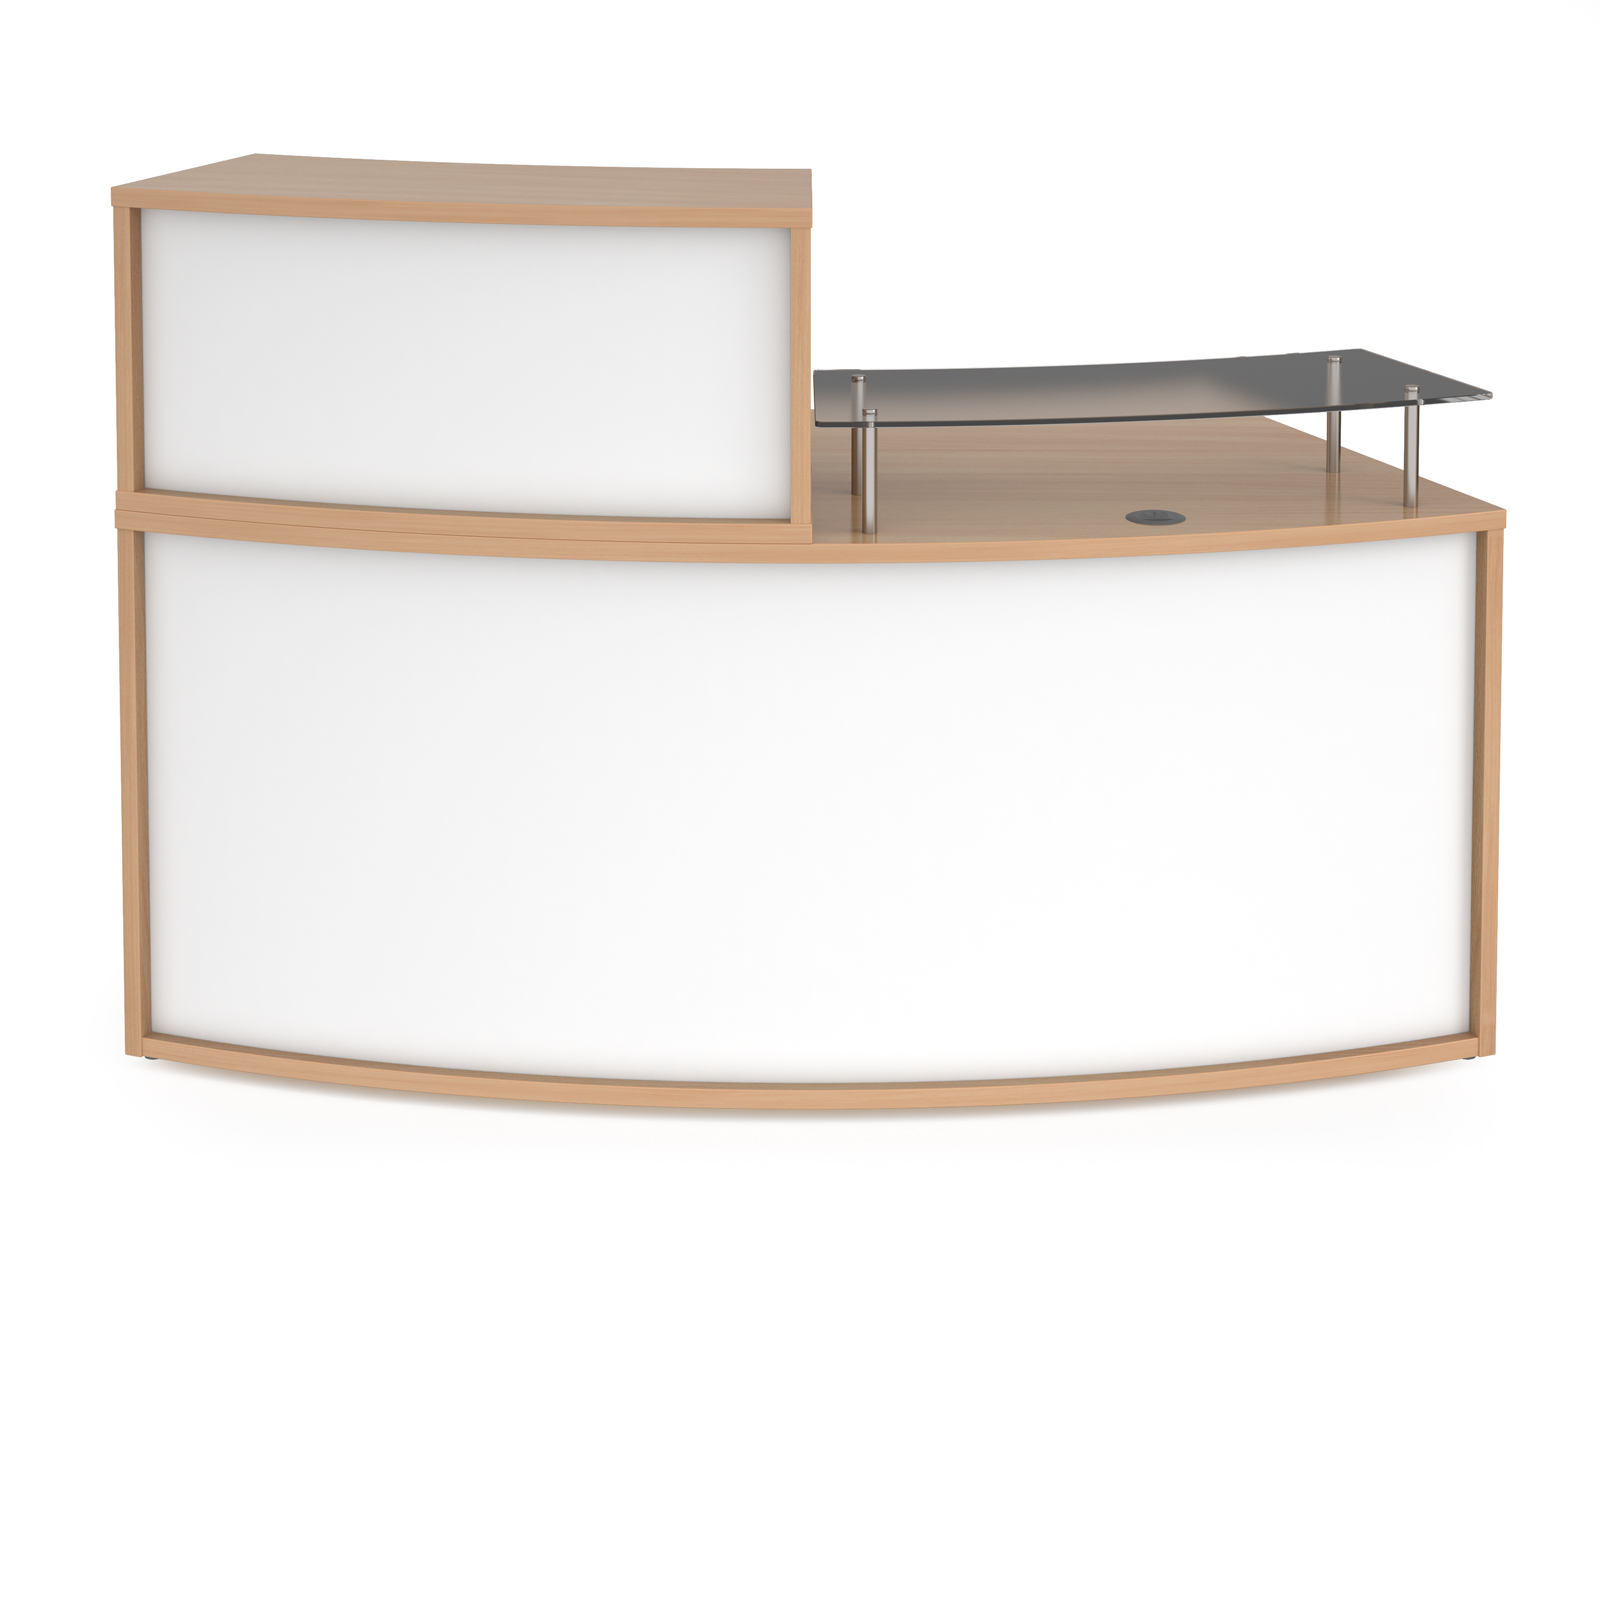 Dams Denver Medium Curved Complete Reception Unit - Beech with White Panels